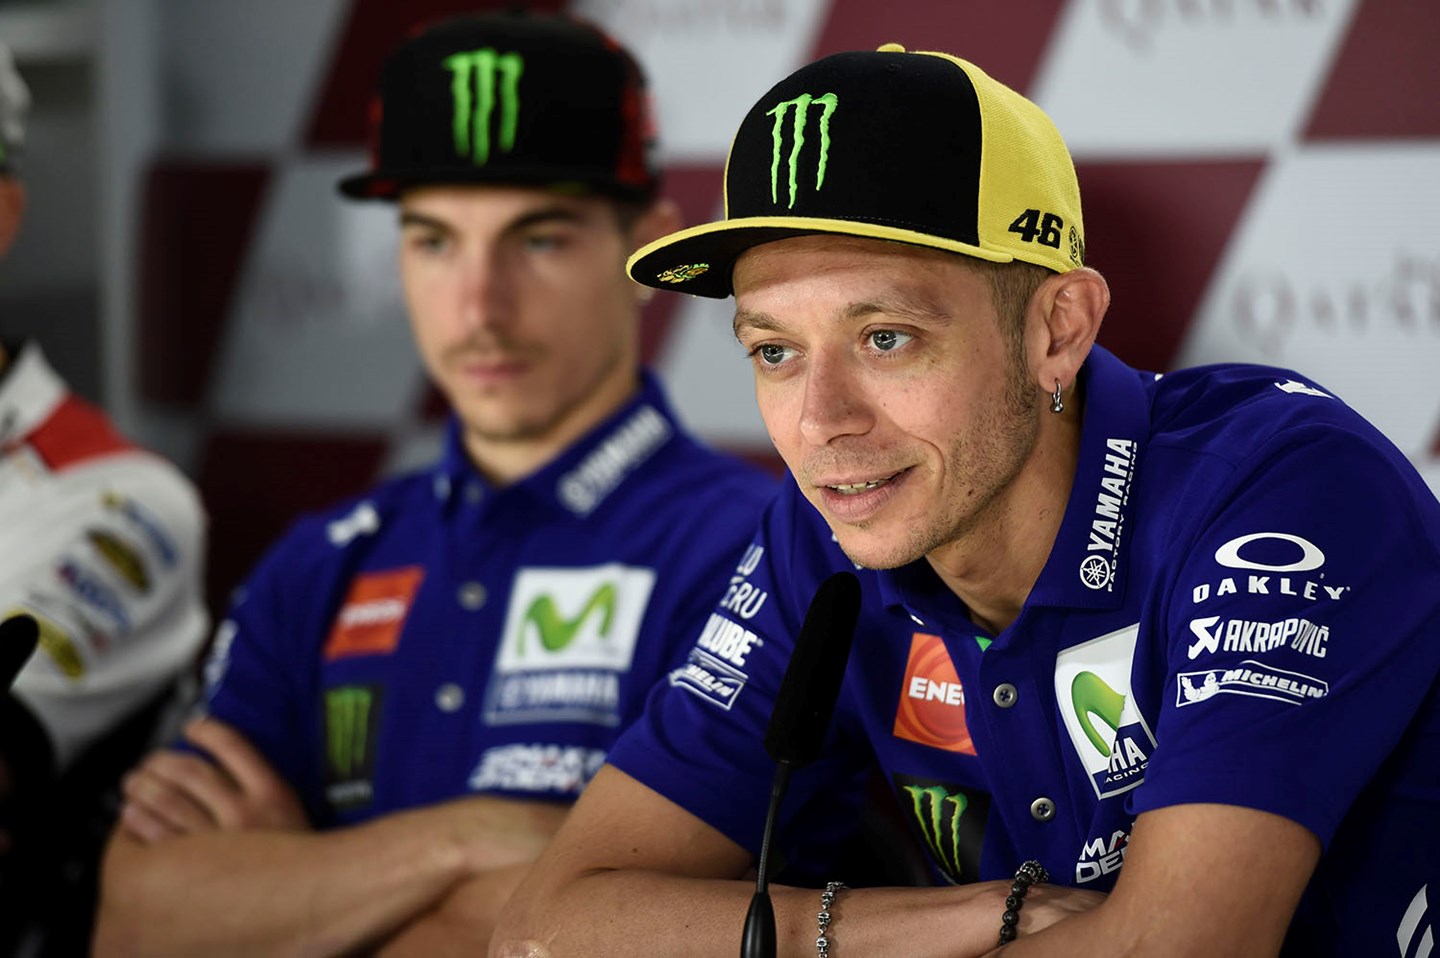 MotoGP: Rossi ready to race after ‘challenging’ winter | MCN